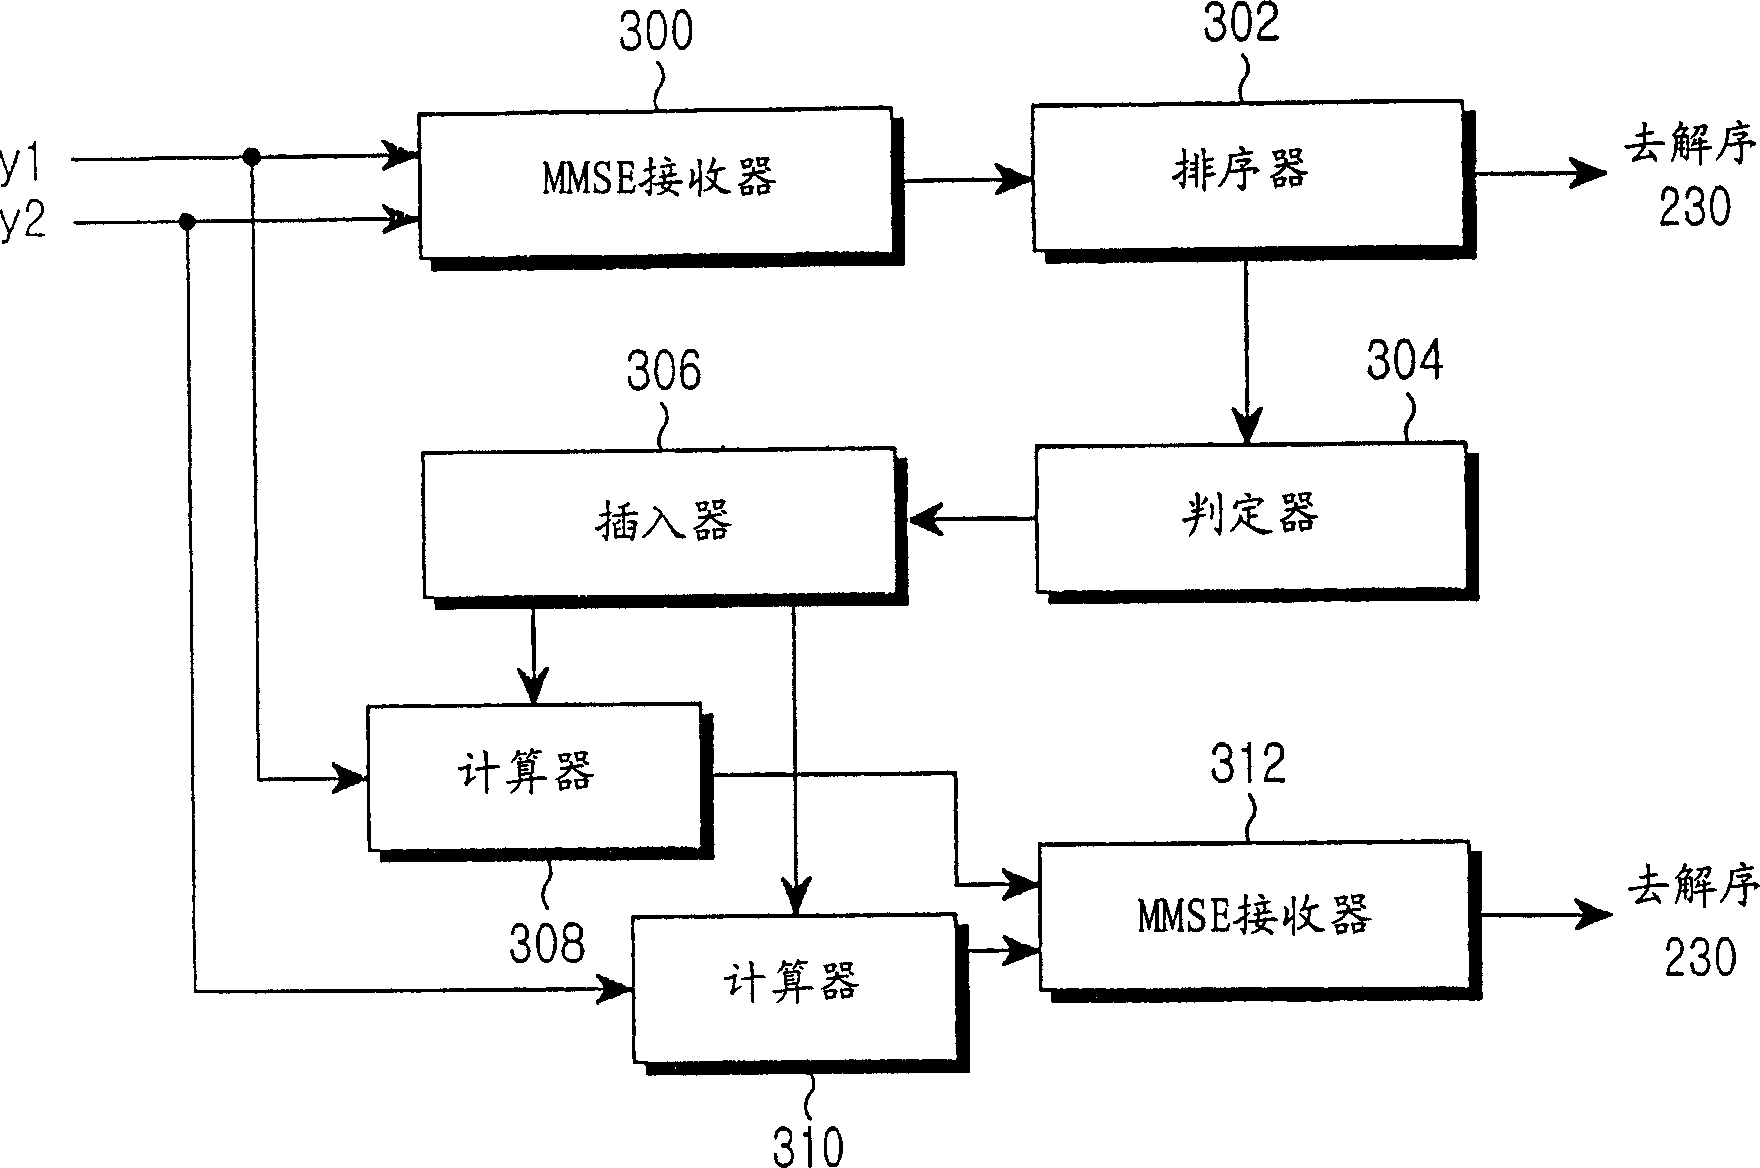 Apparatus and method for cancelling interference in an OFDM system using multiple antennas